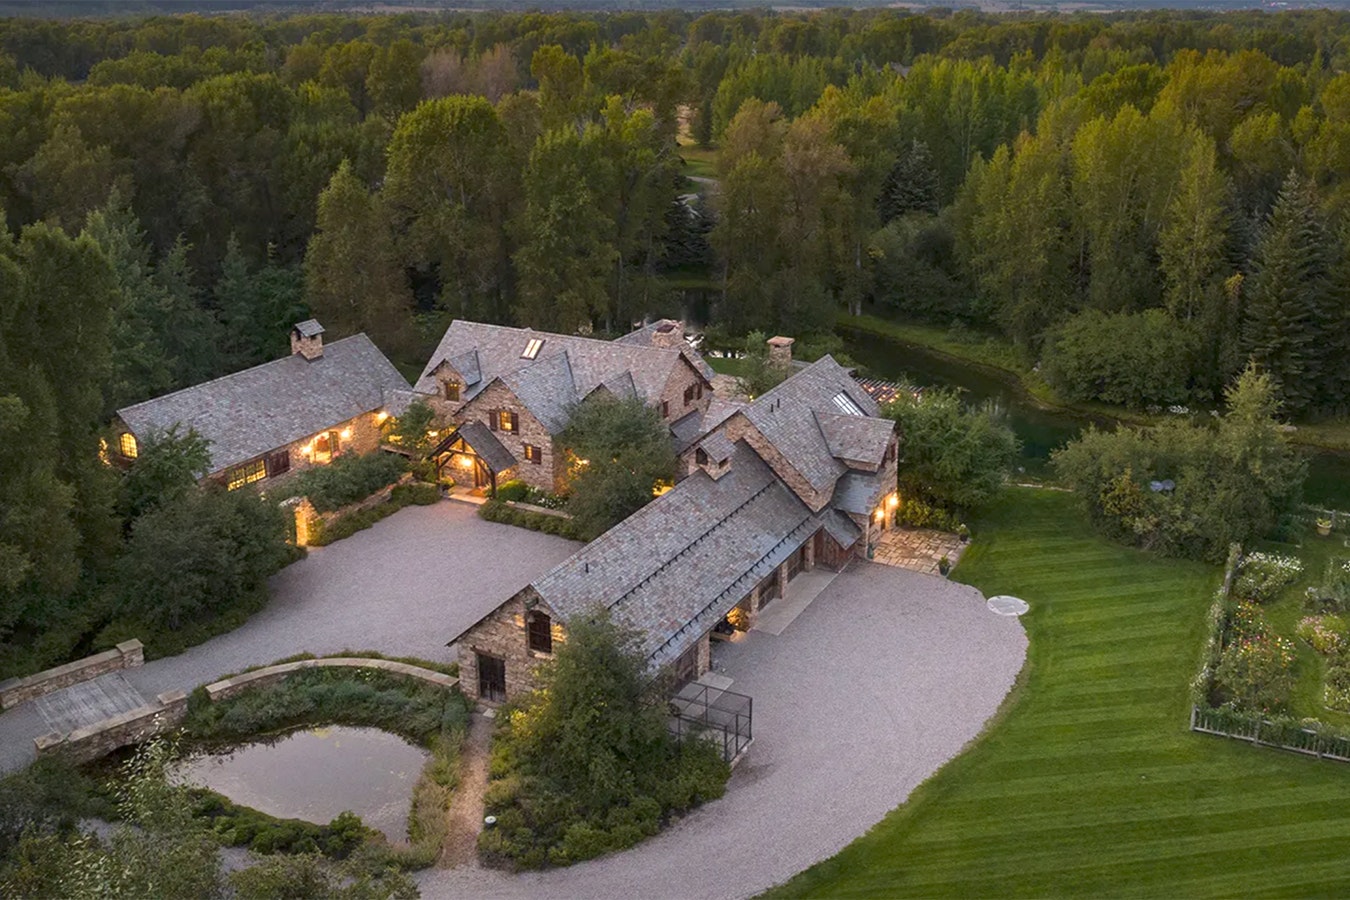 This nearly 5-acre property in the Jackson Hole area is listed with Sotheby's International Realty for $22.5 million.